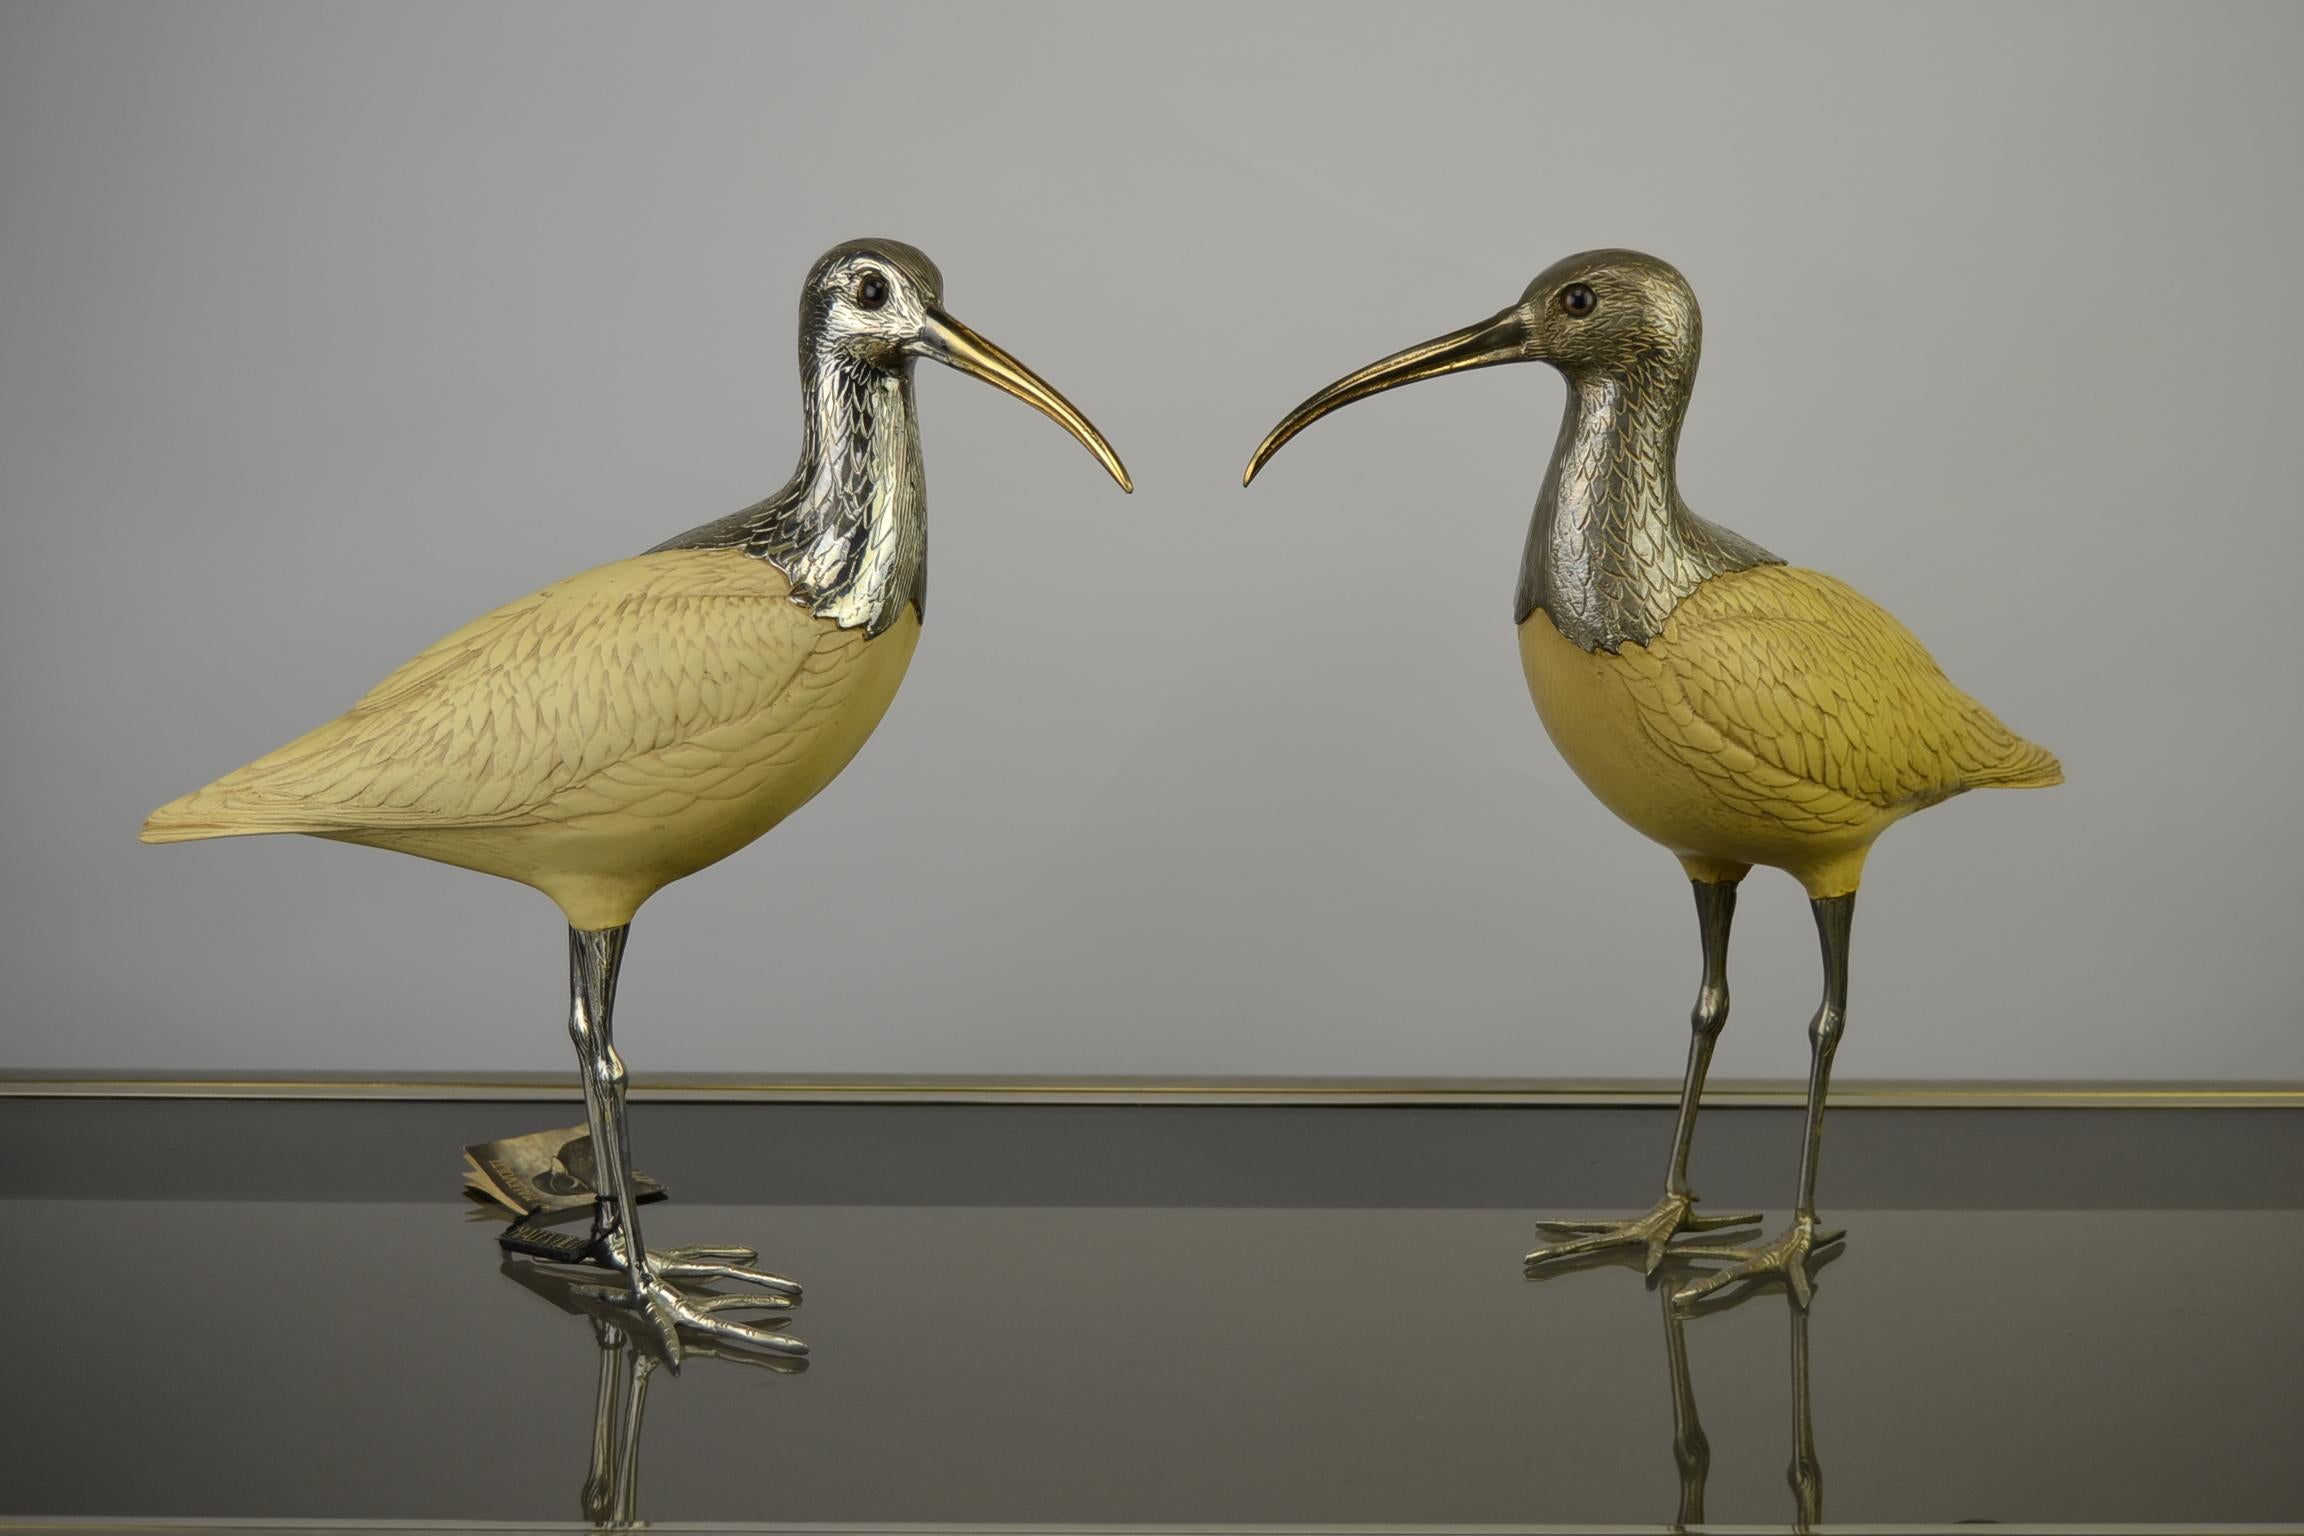 Ibis Bird sculptures by Malevolti Italy. 
The bird statues are made of resin with silvered metal heads and legs. 
This Italian design sculptures date circa 1950s. 

Interior Accents- Interior Decoration - Animal statues - Bird Statues - Bird